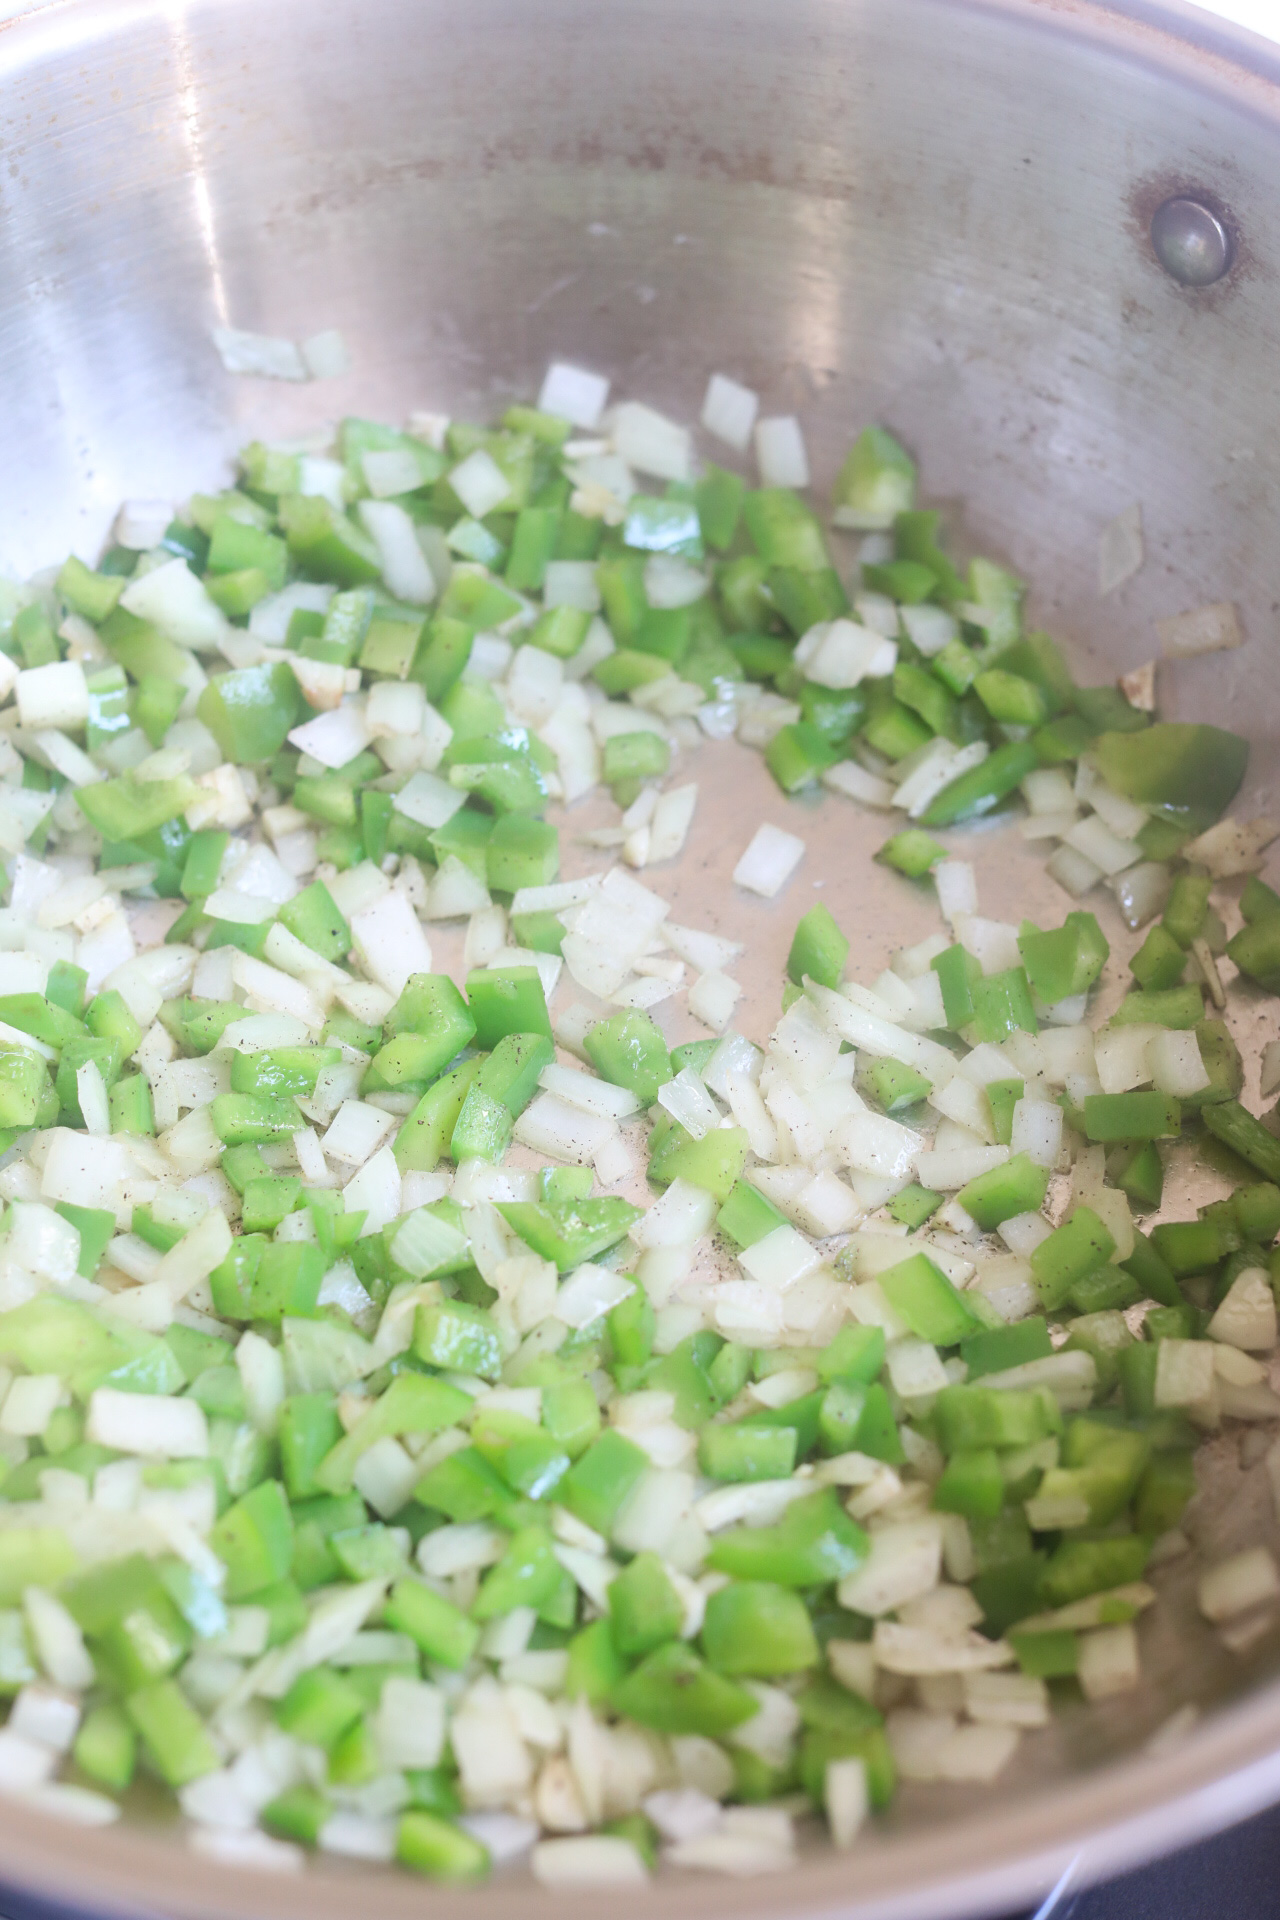 Chopped green peppers and onions in a pan with oil, salt and pepper.